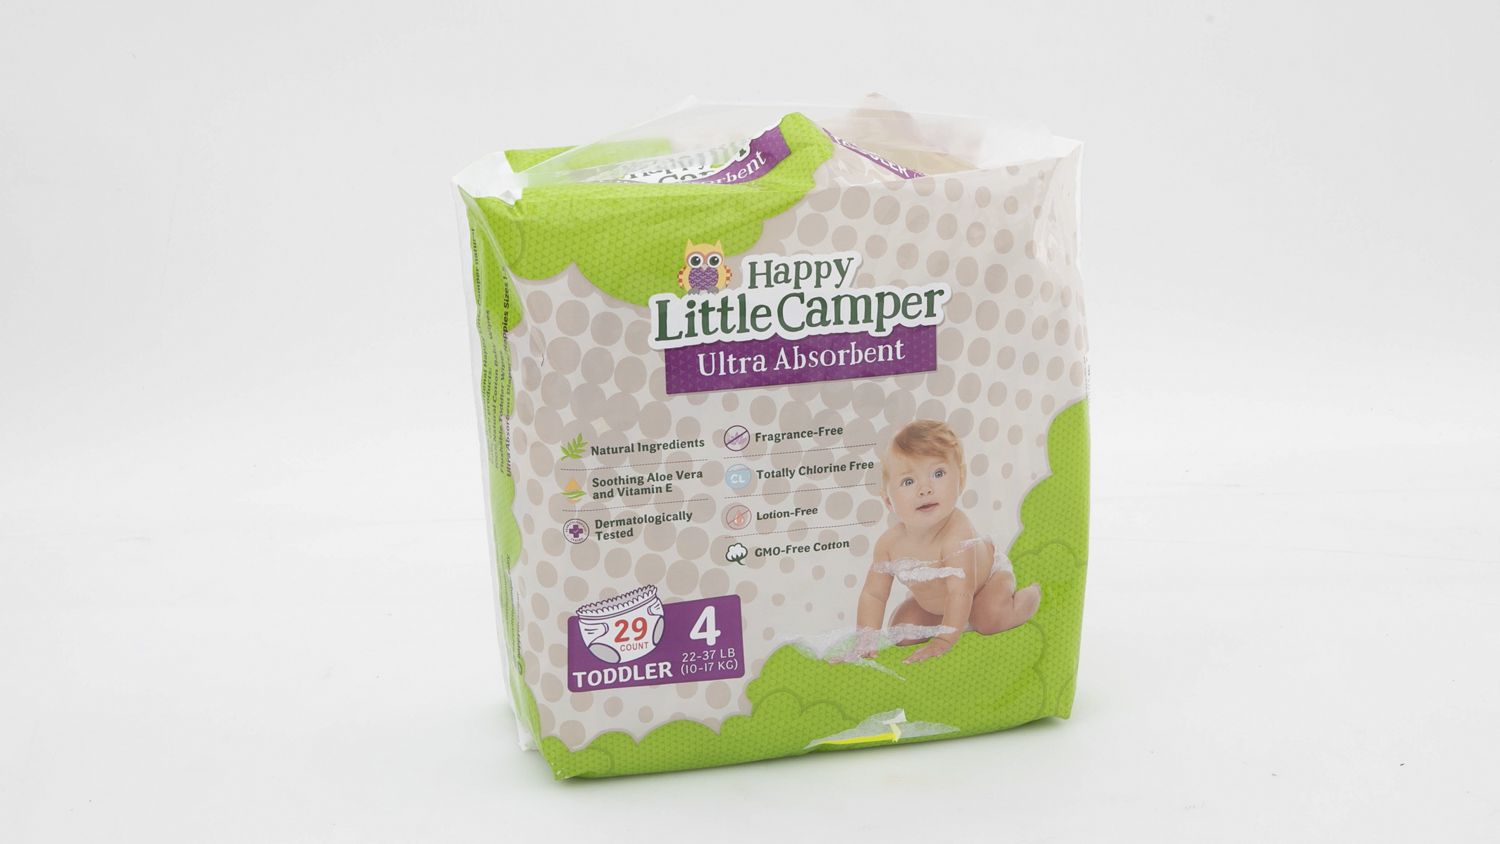 Happy Little Camper Ultra Absorbent Toddler Size 4 Review, Disposable nappy